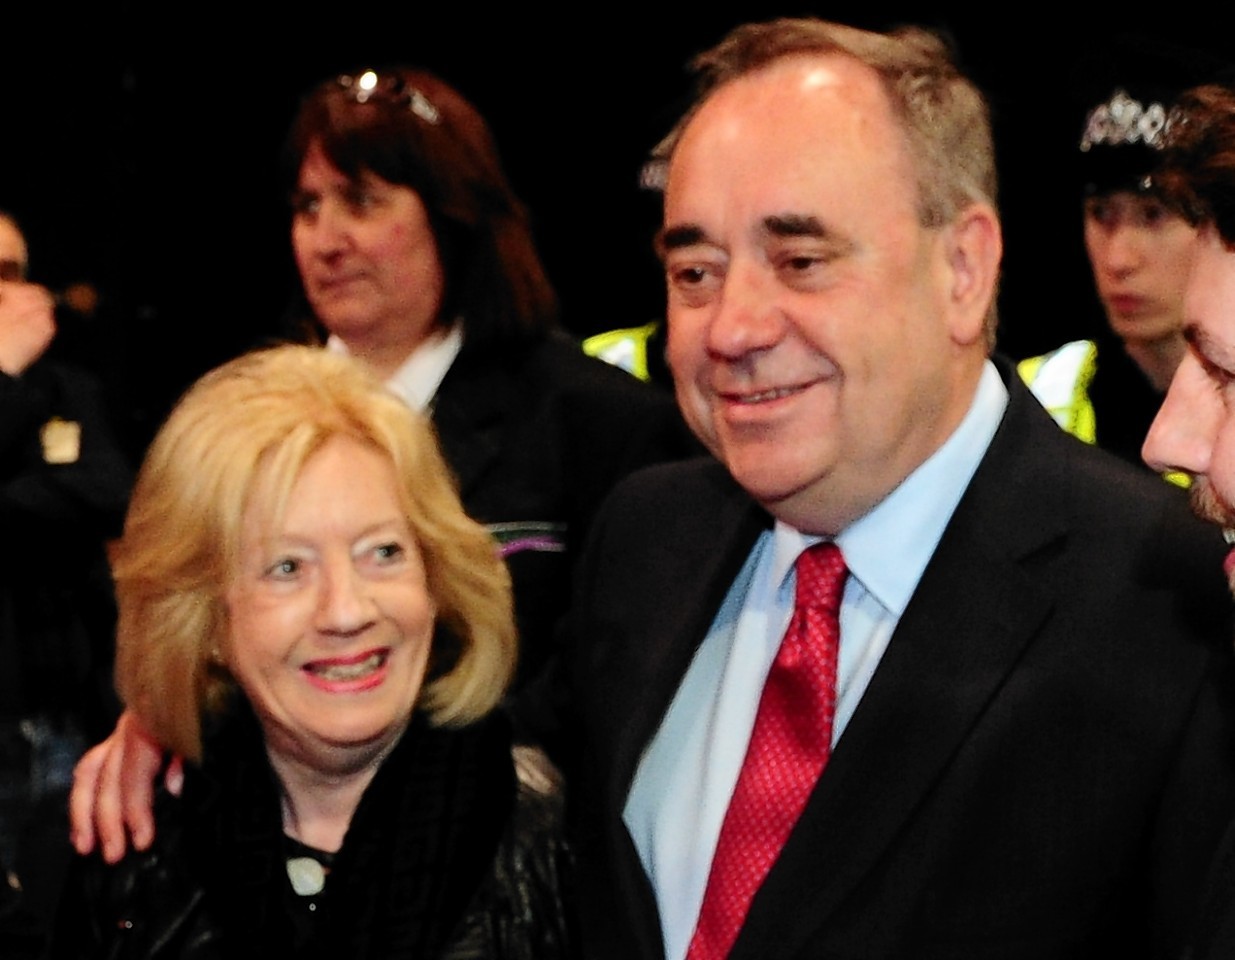 Alex Salmond arrives at the count